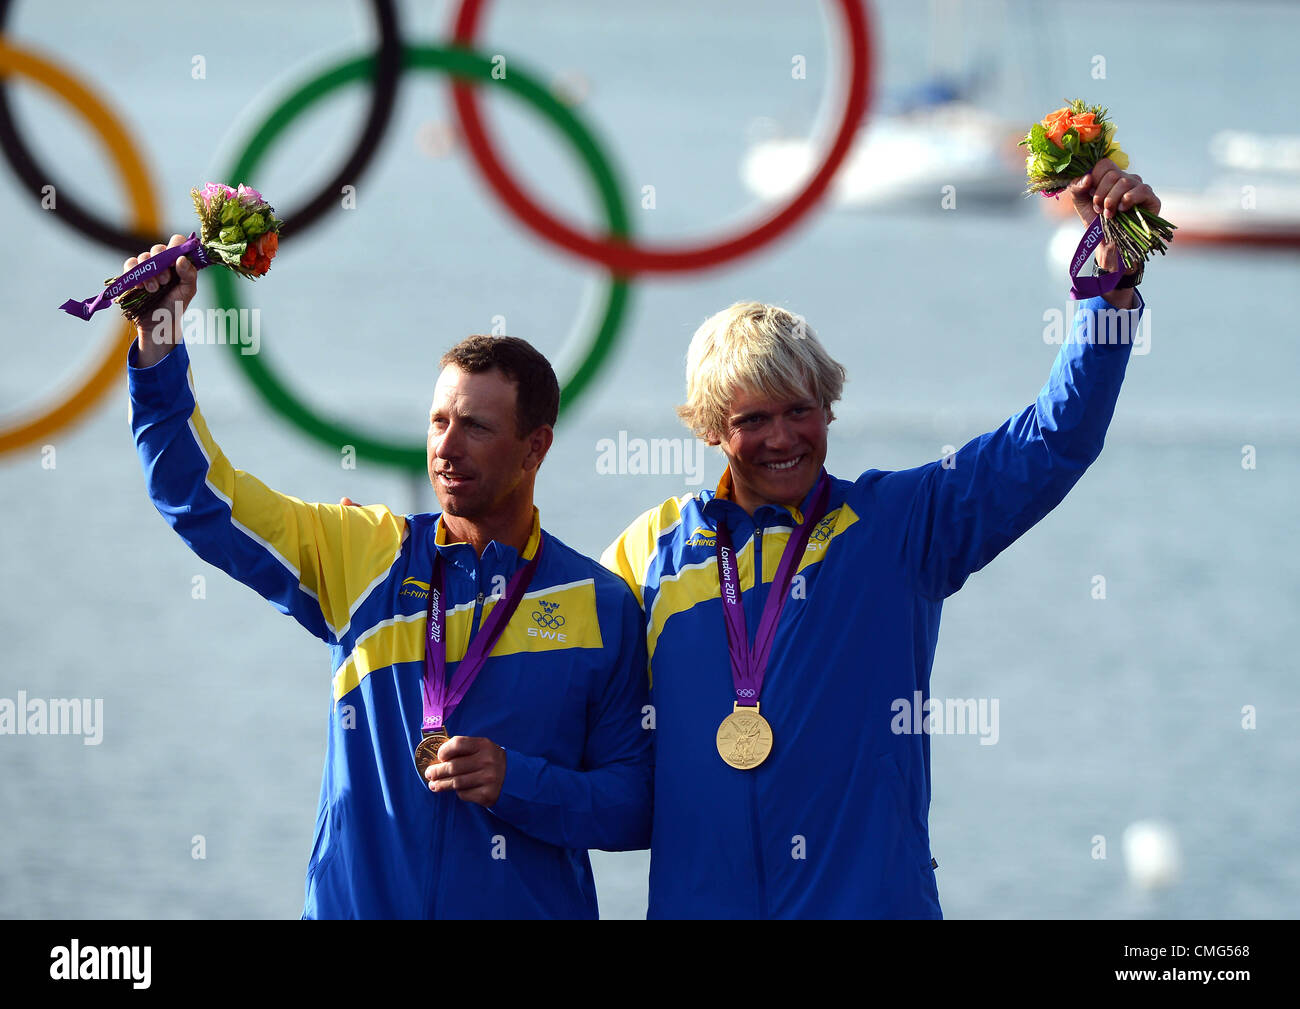 Olympic Sailing, action during the London 2012 Olympic Games at the Weymouth & Portland Venue, Dorset, Britain, UK.  Fredrik Loof and Max Salminen of Sweden celebrate on the podium after winning the gold medal in the Star sailing class August 5th, 2012 Stock Photo